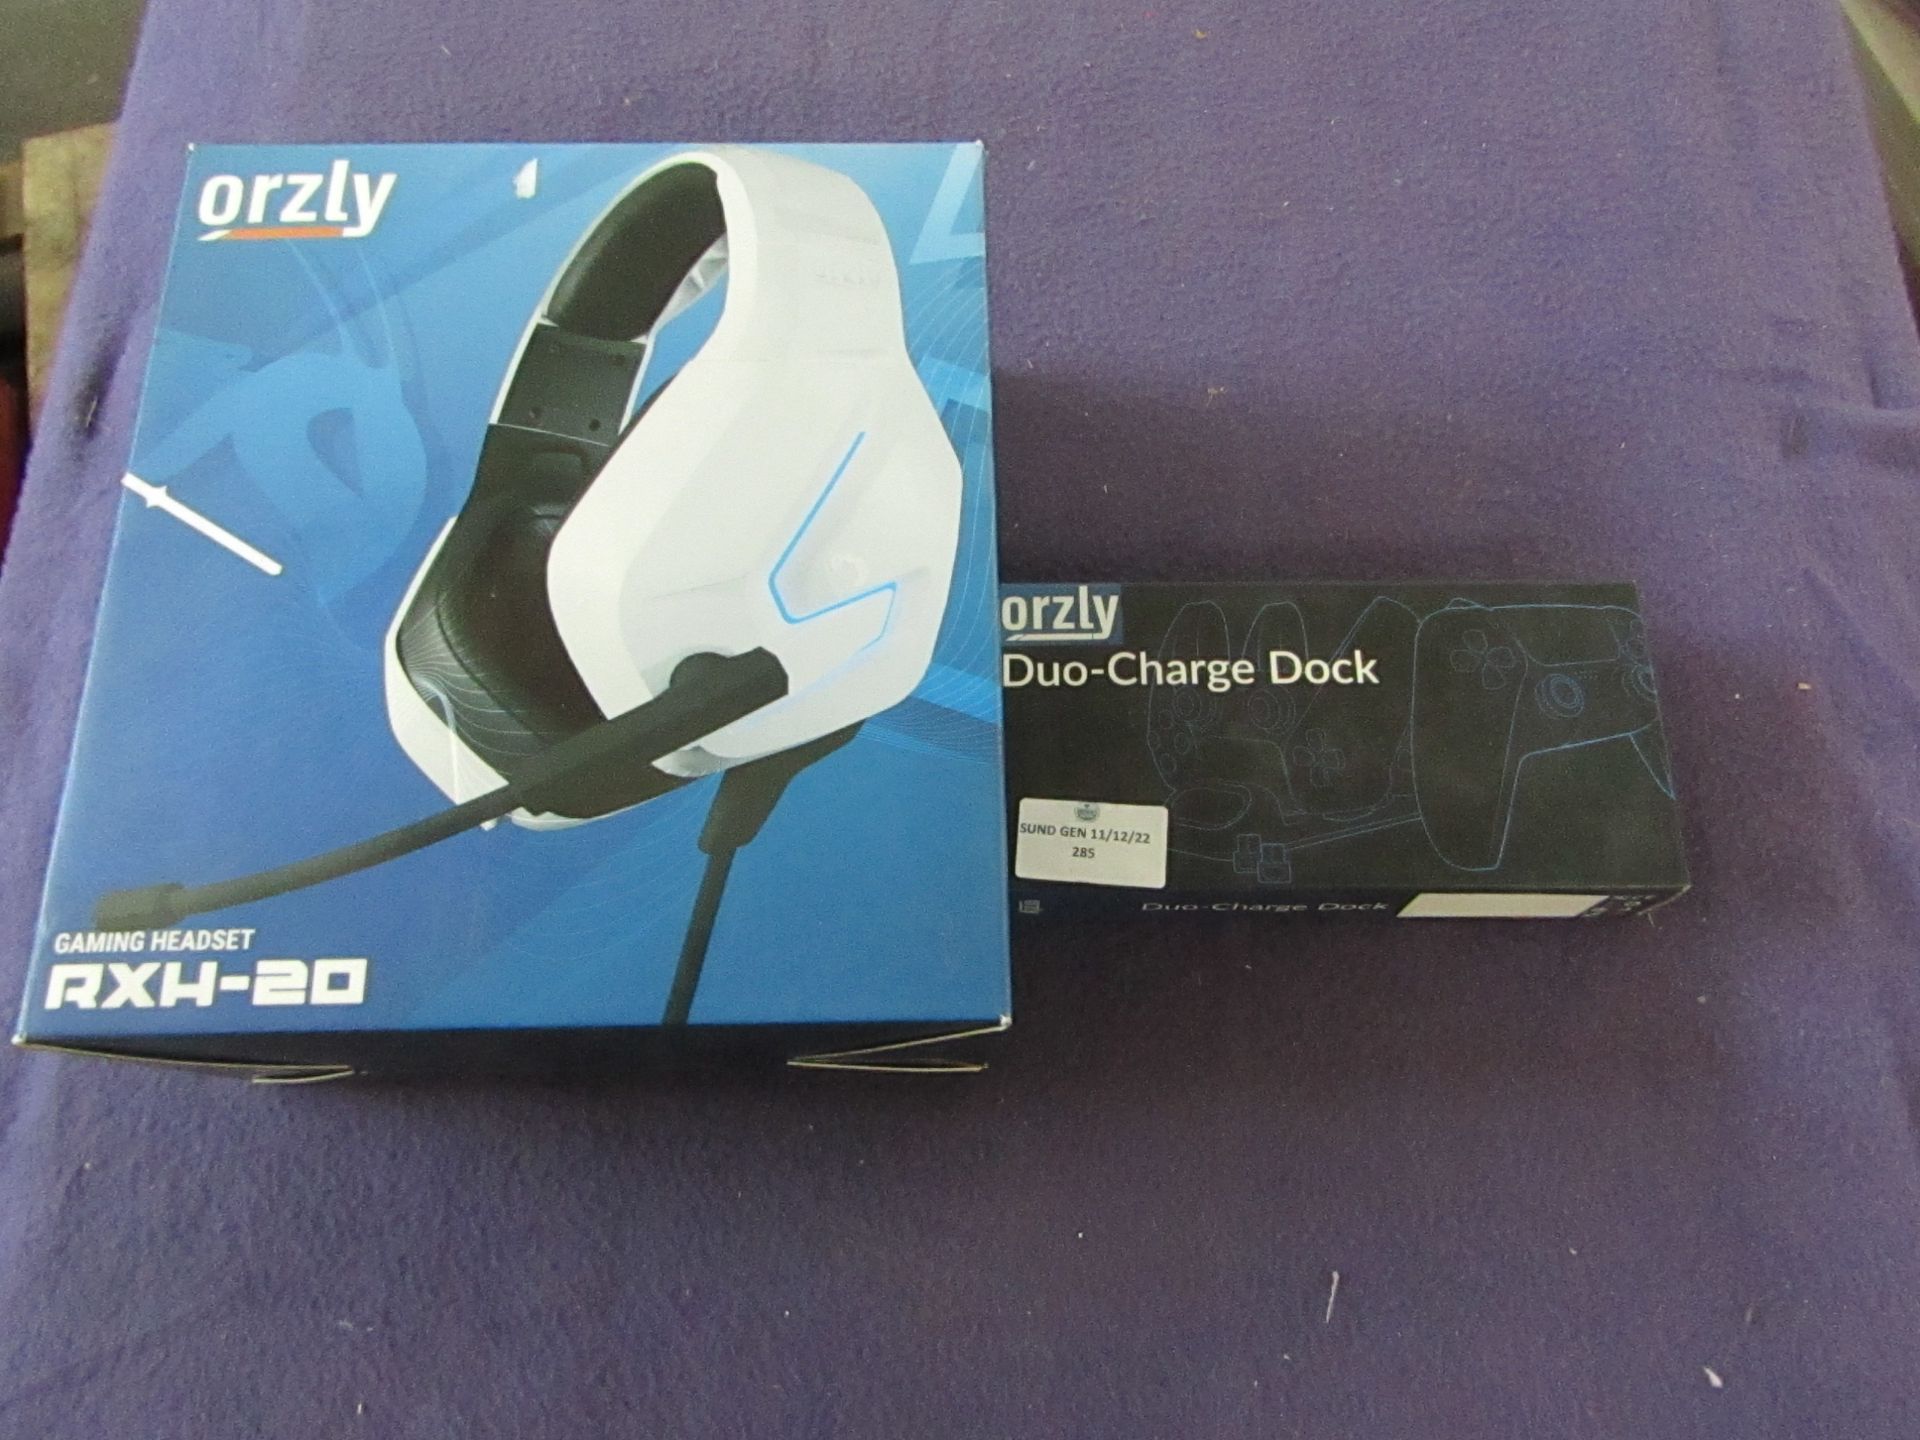 1x Orzly - RXH-20 White Gaming Headset - Unchecked & Boxed. 1x Orzly - Duo Charge Dock - Unchecked &